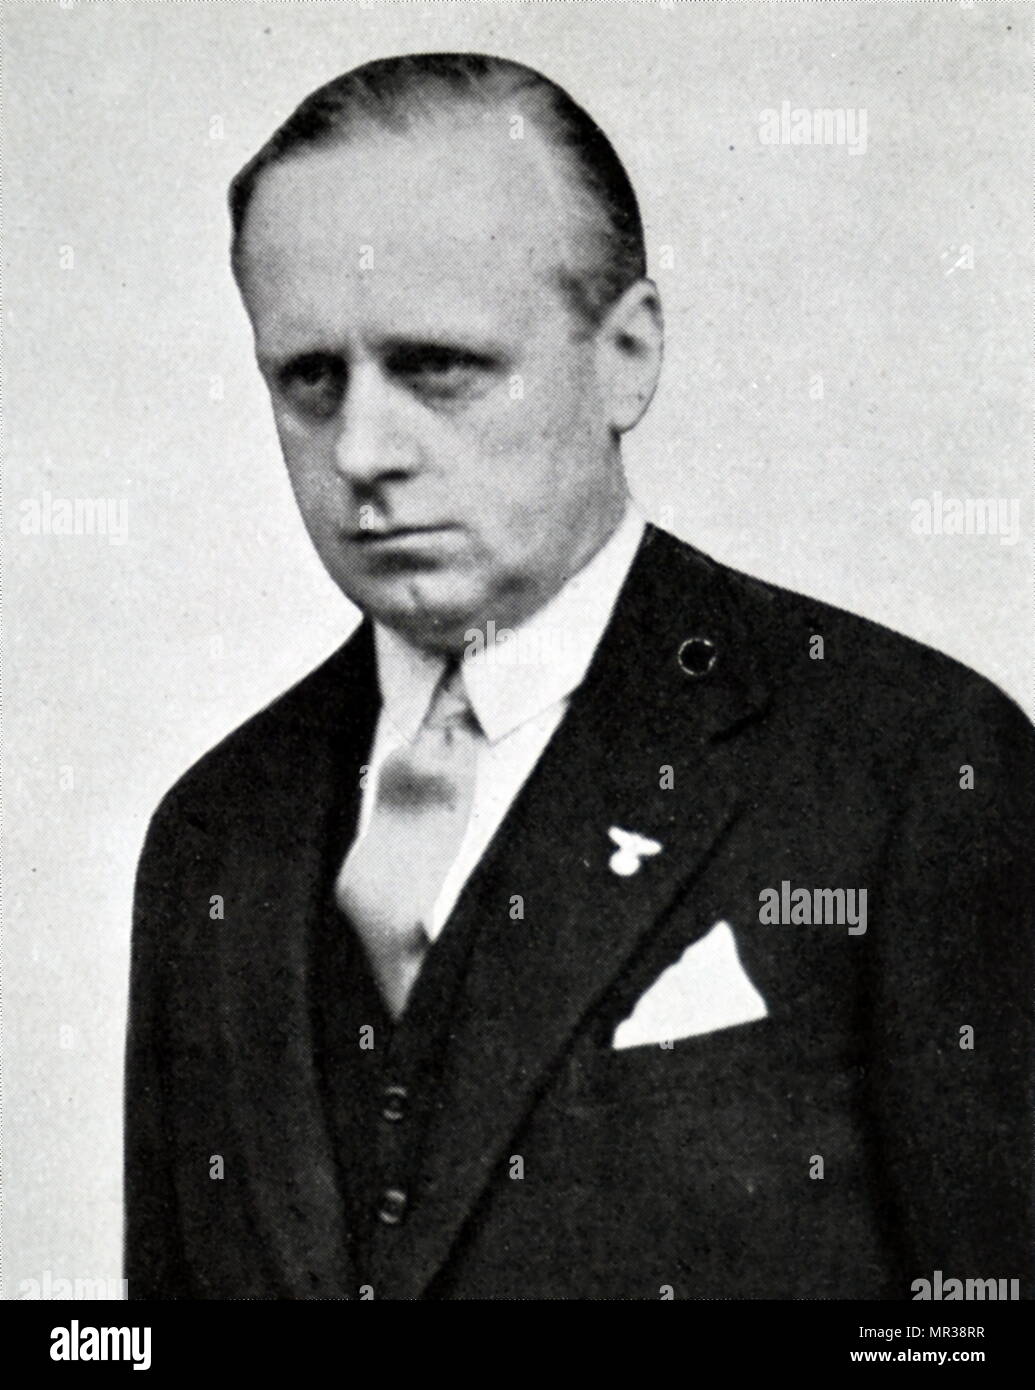 Ulrich Friedrich Wilhelm Joachim von Ribbentrop (30 April 1893 – 16 October 1946), more commonly known as Joachim von Ribbentrop, was Foreign Minister of Nazi Germany from 1938 until 1945. Stock Photo